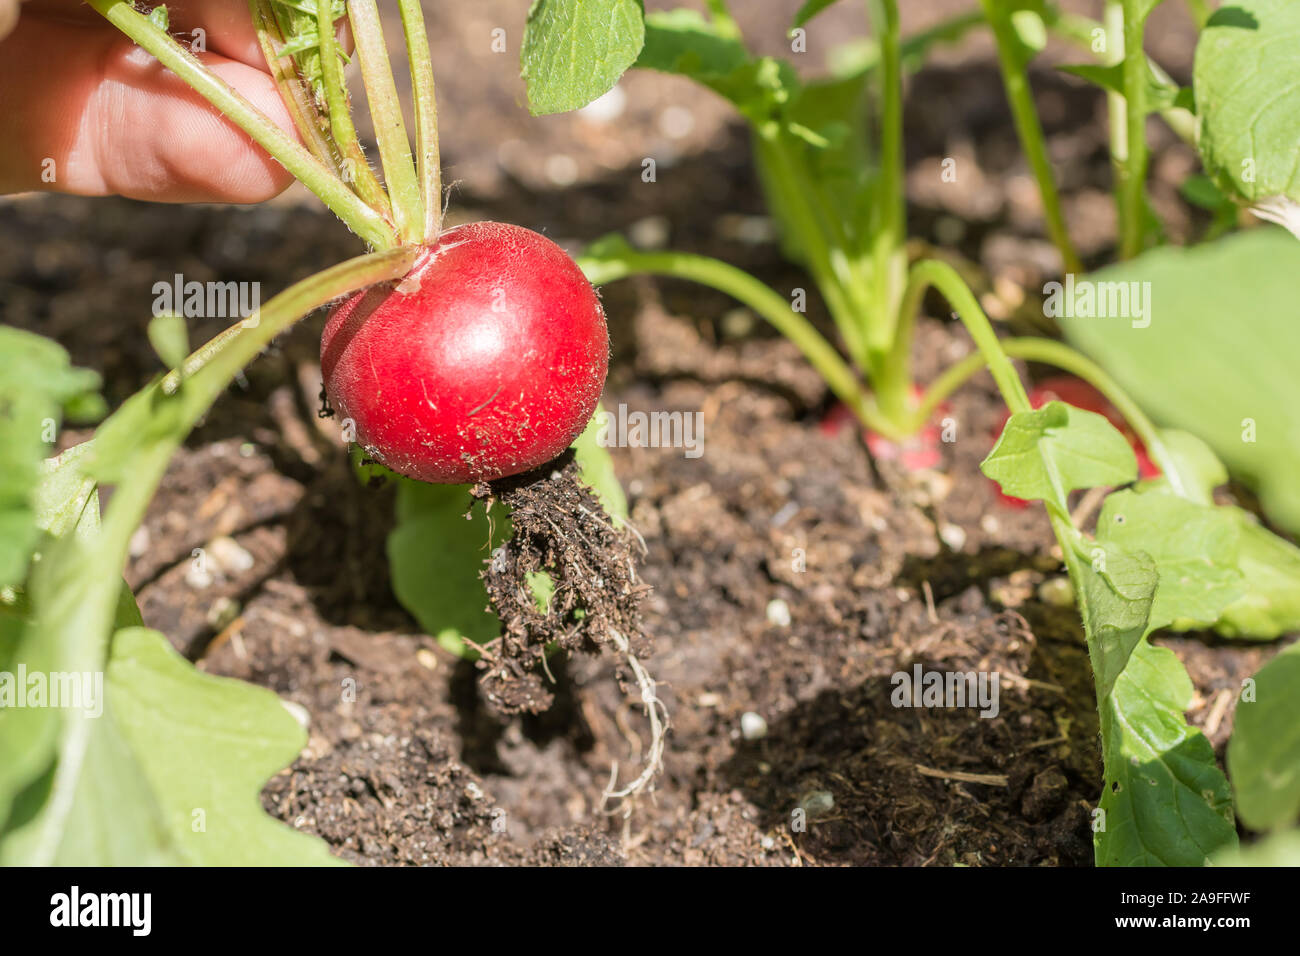 Ripe radish is harvested from the vegetable patch Stock Photo